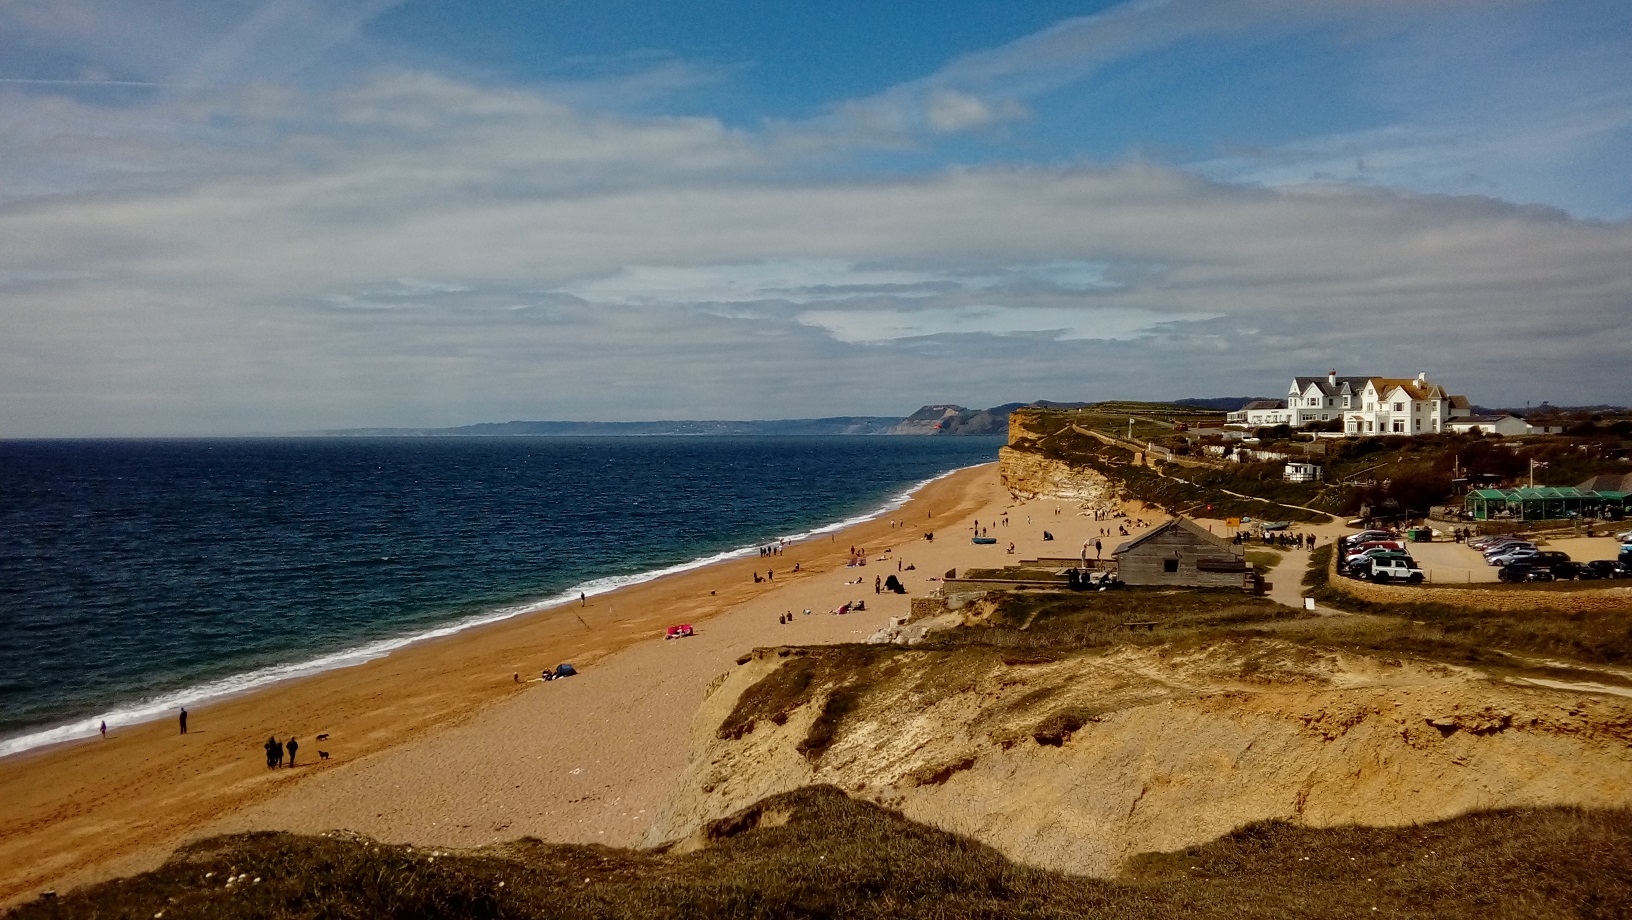 Beach near Burton Bradstock in Dorset viewed on a sunny spring day. Dunes and cliffs are present in the picture, with a distant coastline in the background.